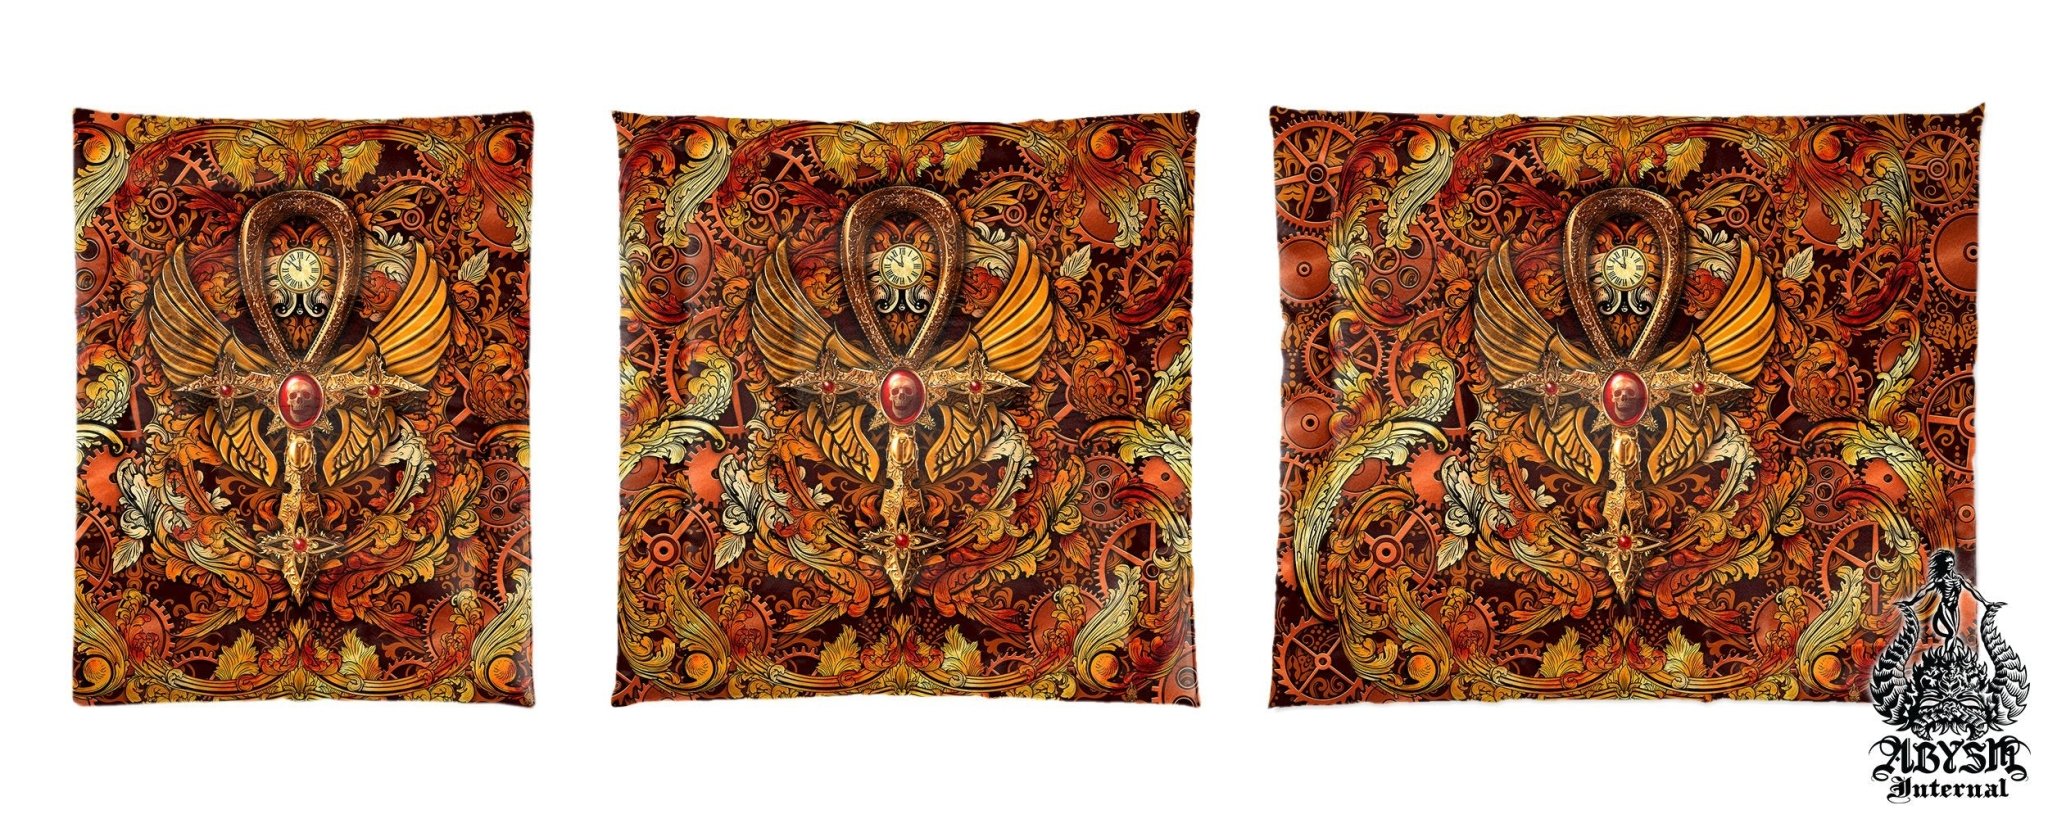 Steampunk Bedding Set, Comforter and Duvet, Victorian Bed Cover and Bedroom Decor, King, Queen and Twin Size - Ankh - Abysm Internal